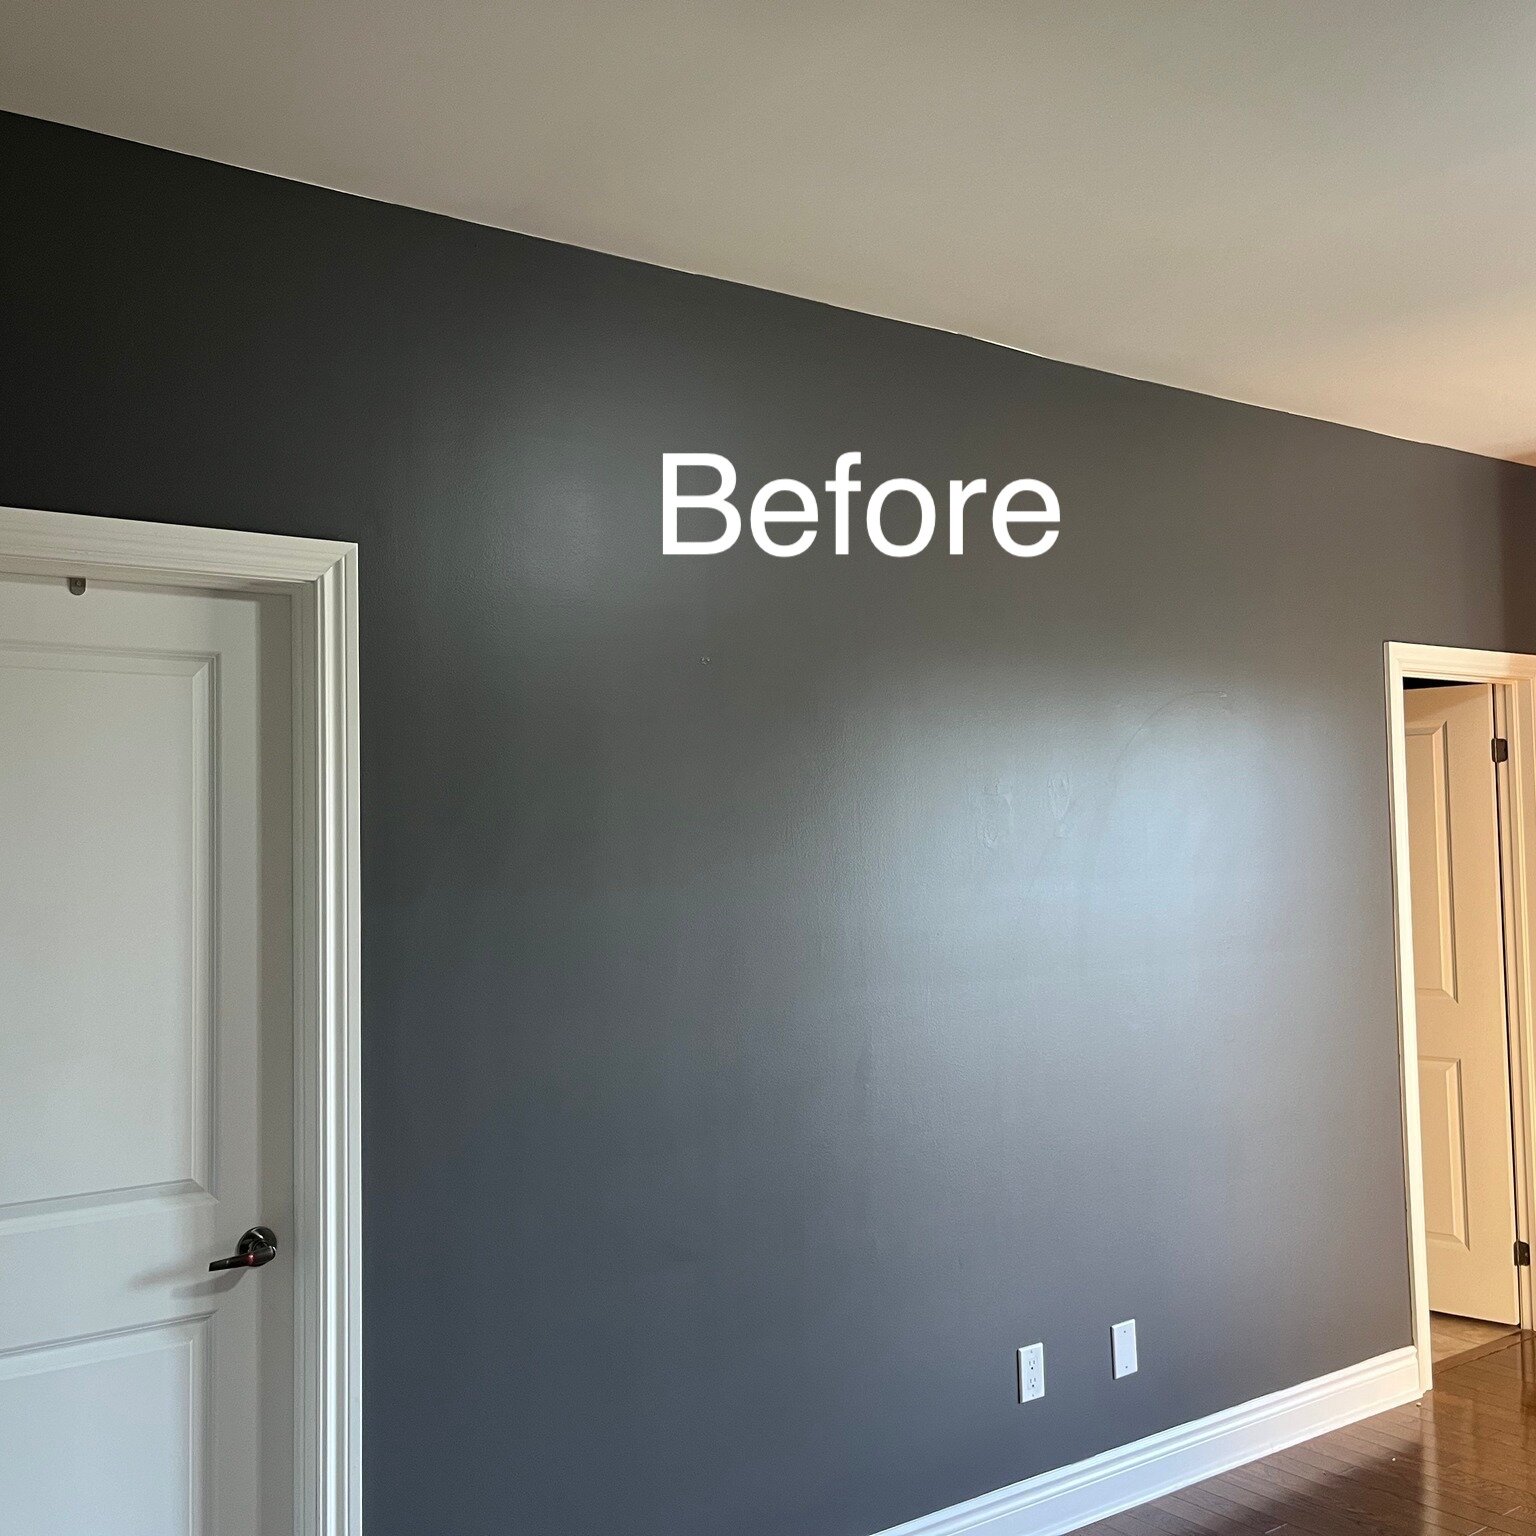 If you have a bold colour you love, try an accent wall!
#choosingpaint #interiordesign #orangeville #orangevillepainters